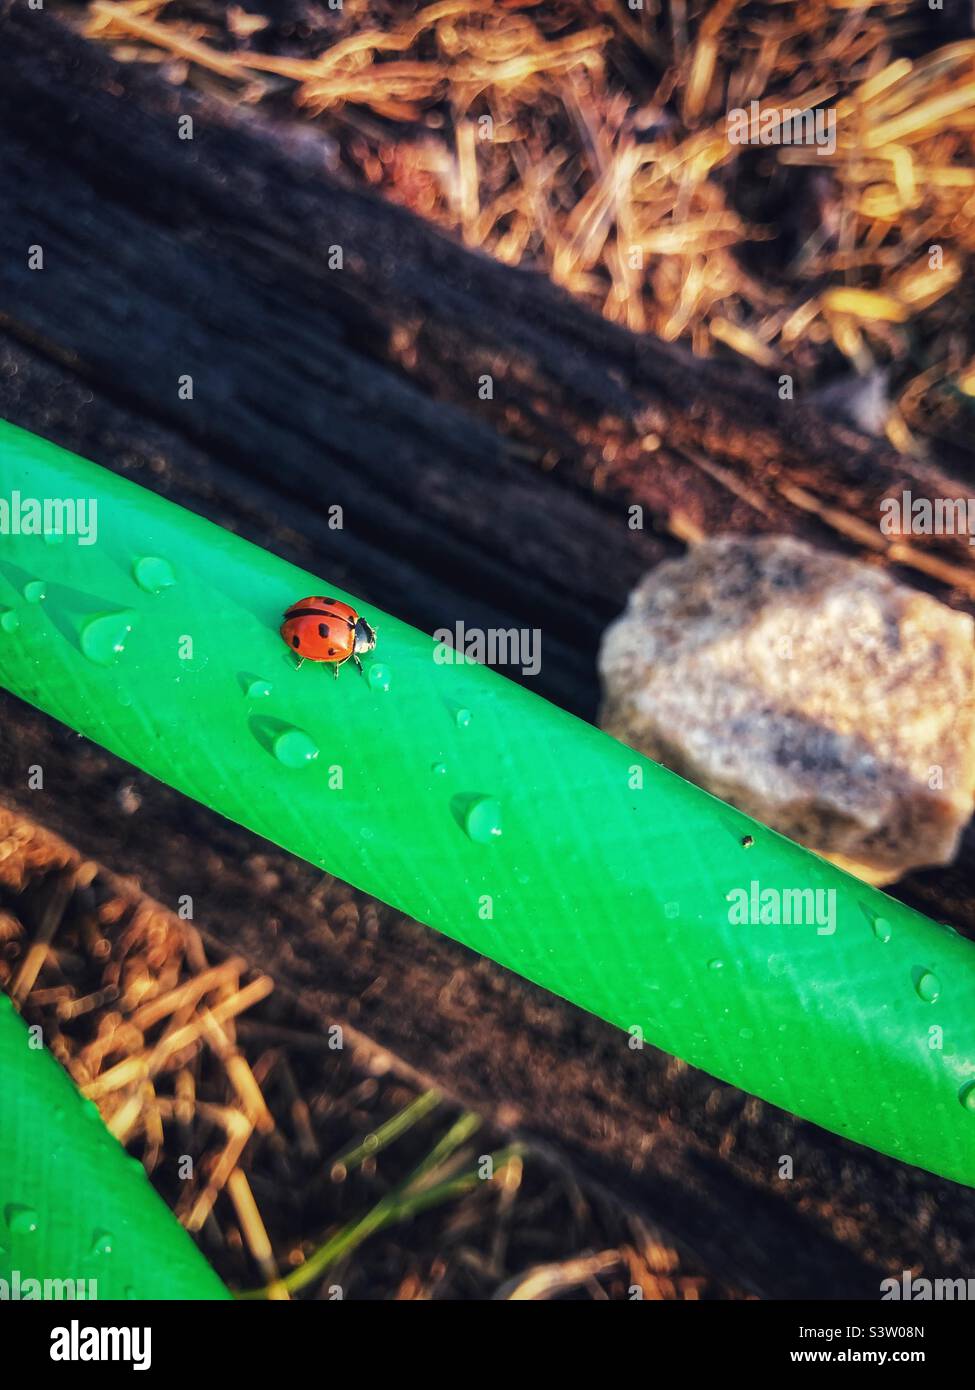 Water drops and a ladybug on green garden hose Stock Photo